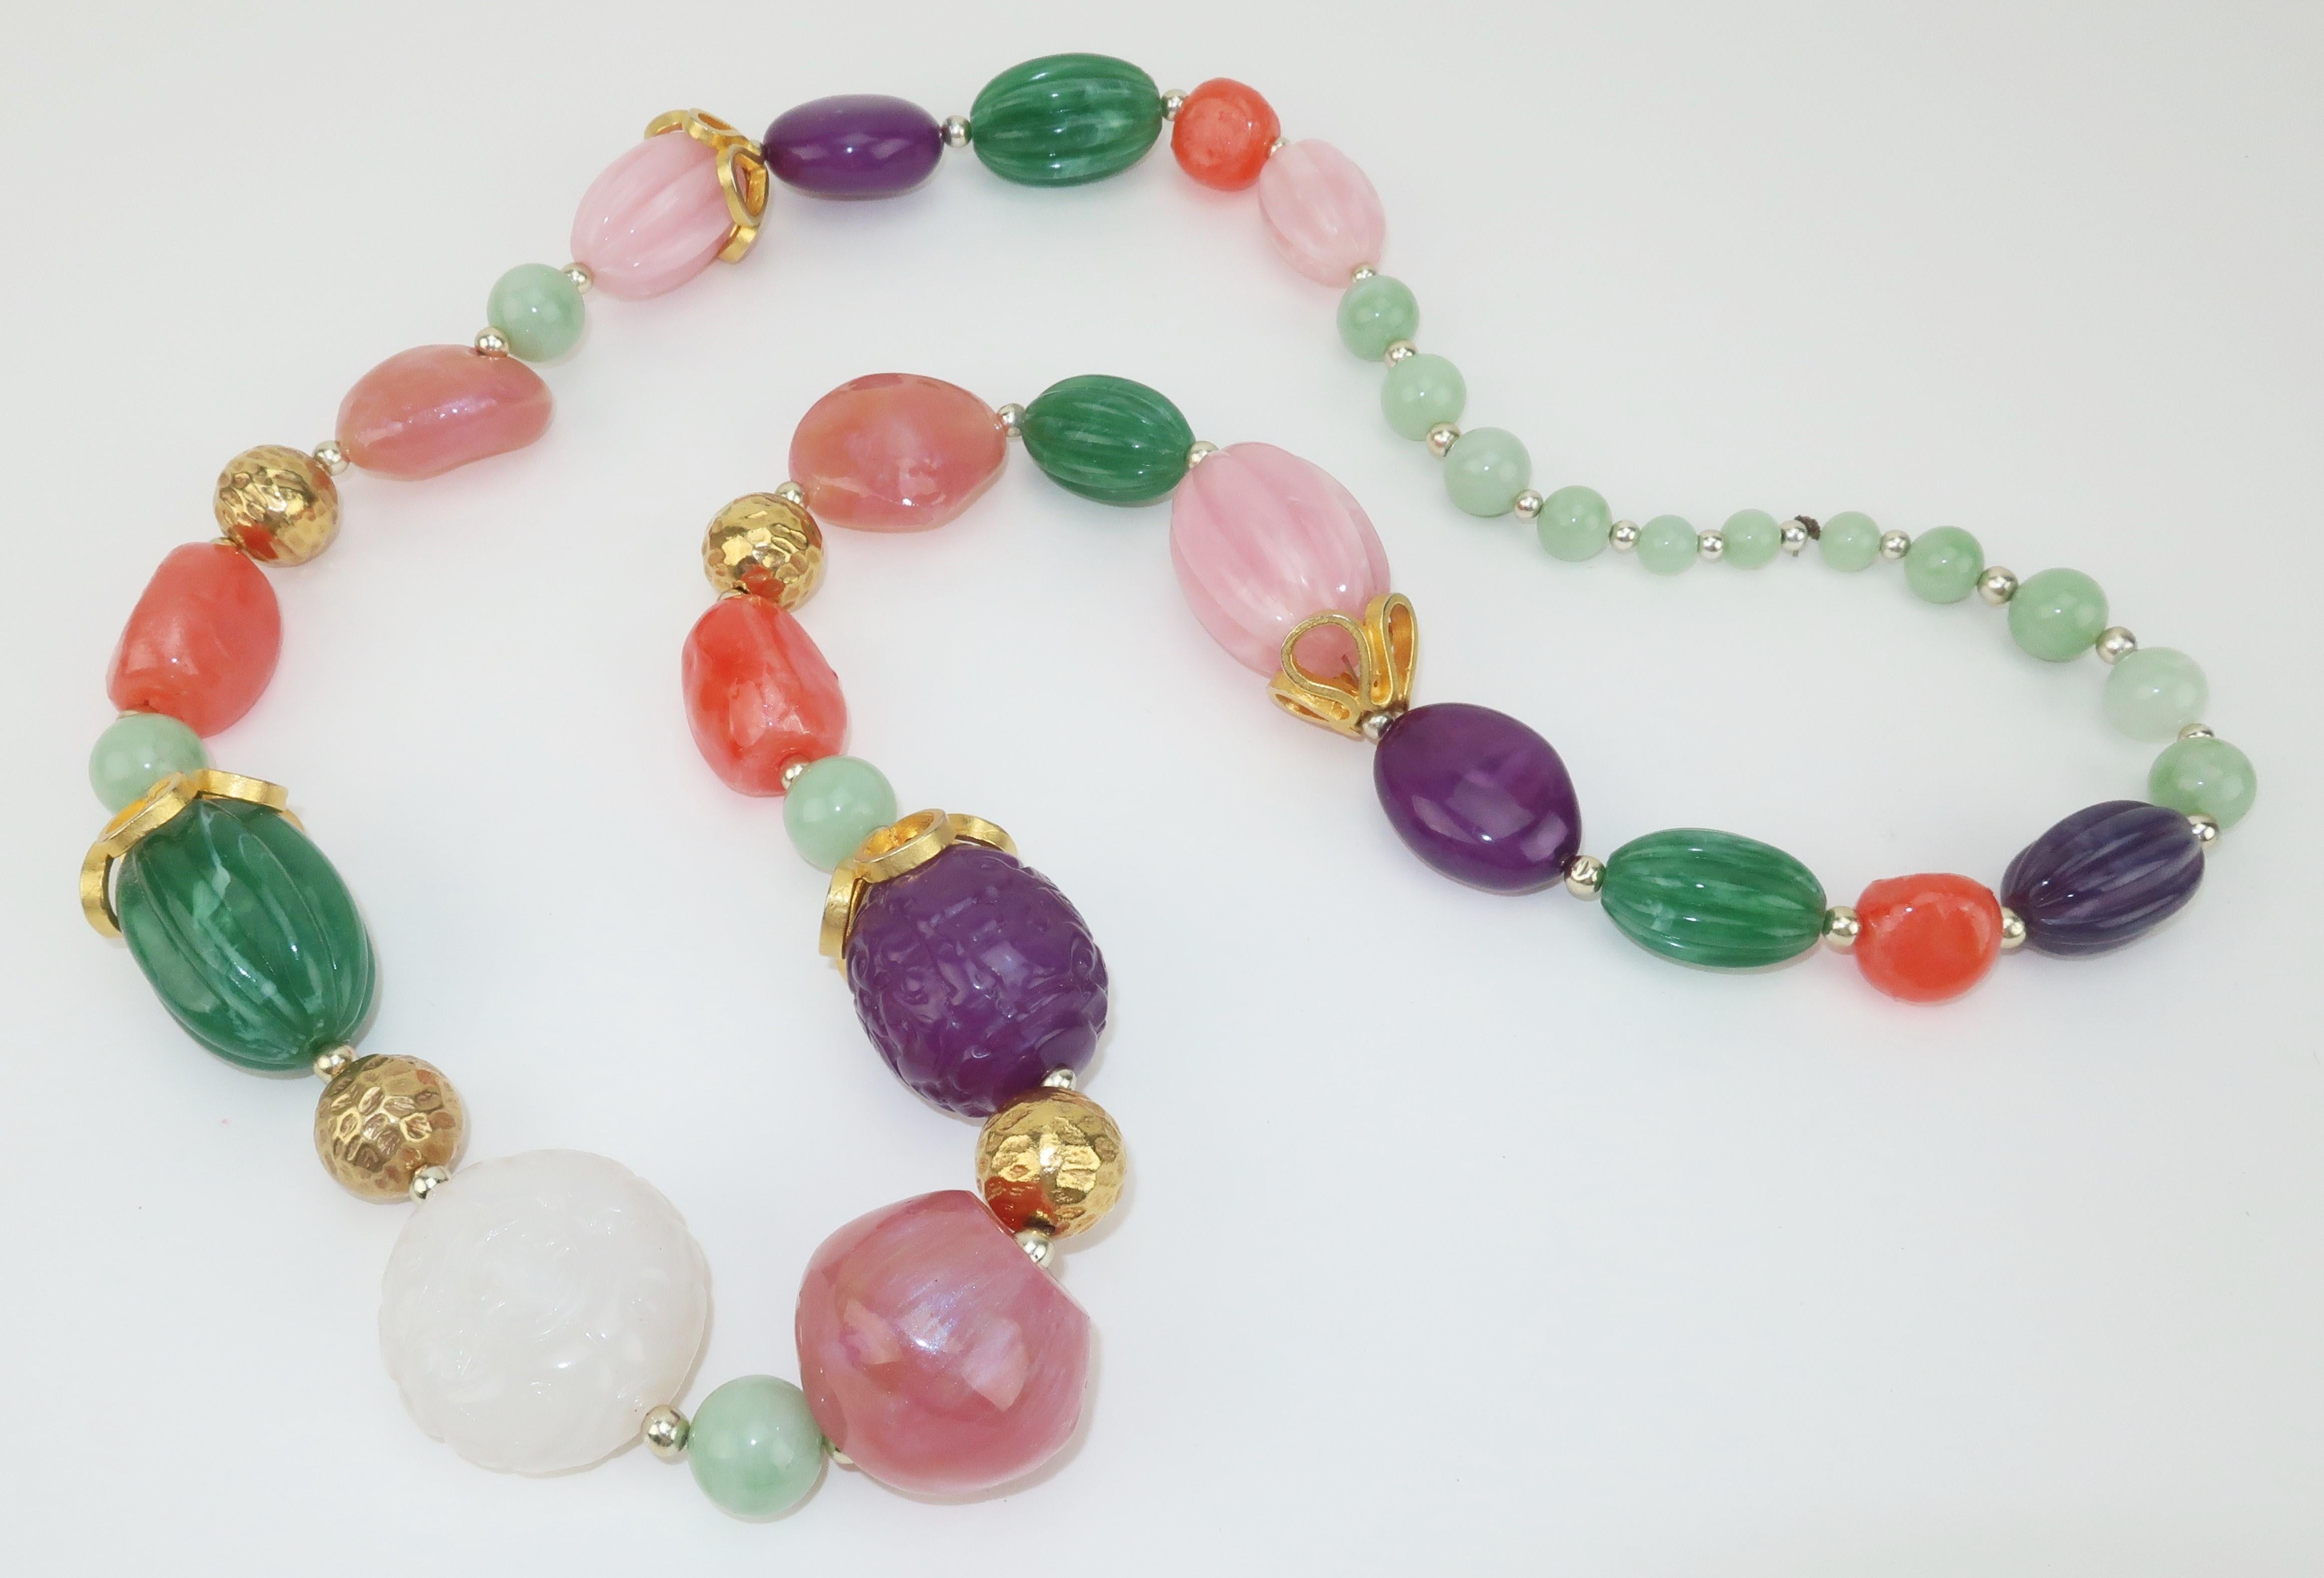 1980's chunky resin bead necklace with the appearance of semi-precious stones accented with gold tone metal fittings and dimpled beads.  Some of the 'stones' are carved with an Asian motif and the smaller beads at the back of the necklace have the